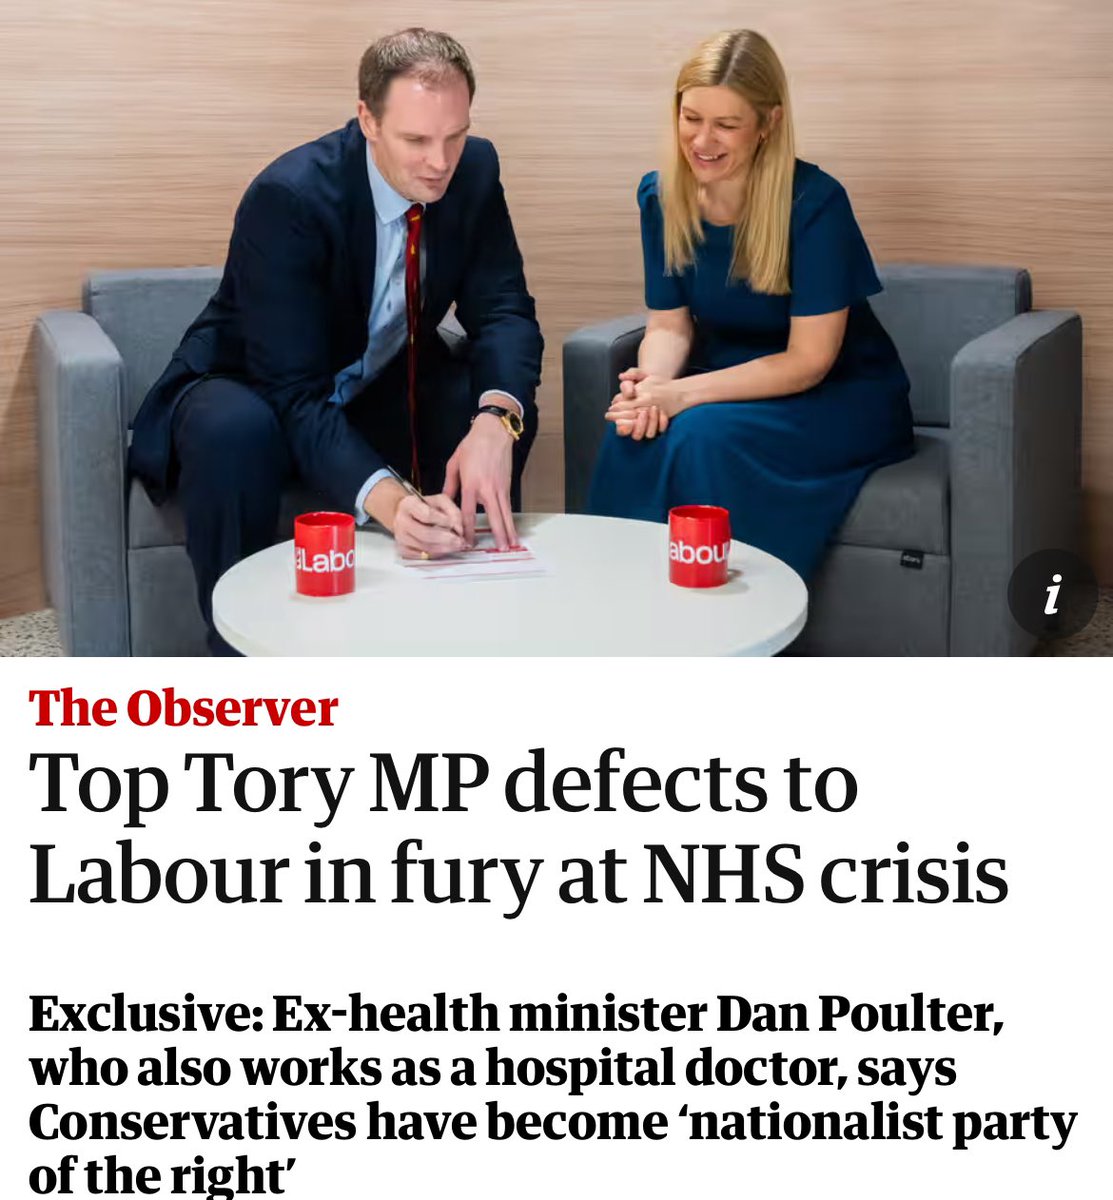 Even Tory MPs are switching to @UKLabour to fix the NHS. The Tories have made a mess of the NHS. Labour will get it back on its feet again. For all our sakes.